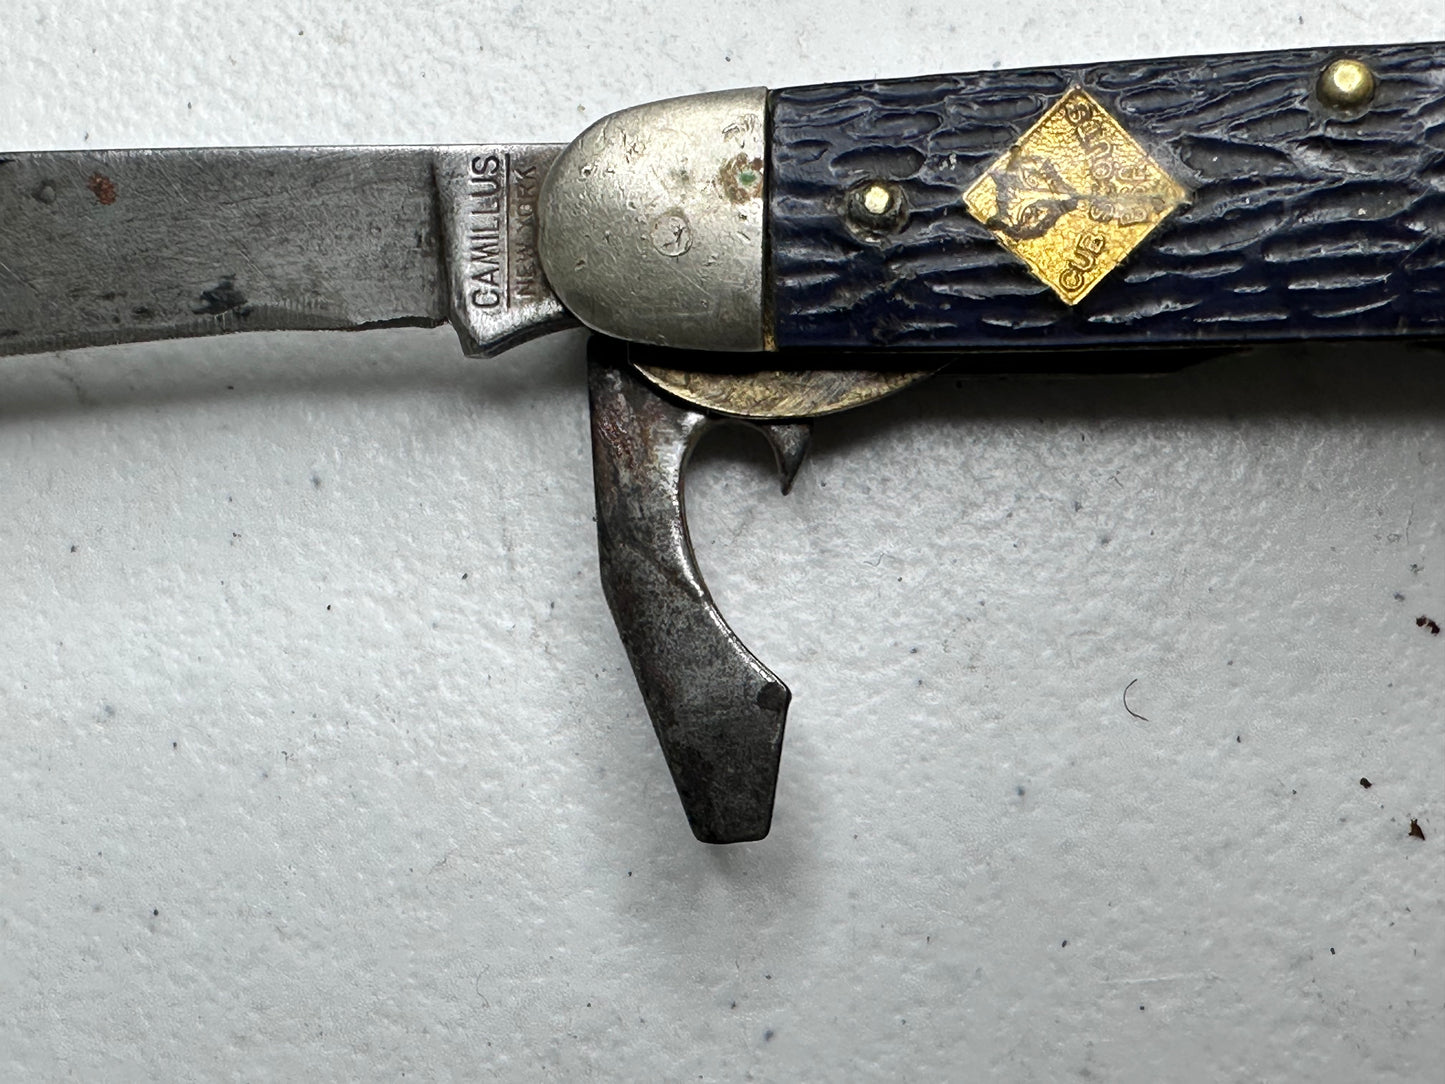 Vintage 1960s Camillus Cub Scouts Pocket Knife - Rare Multi-Tool Collectible